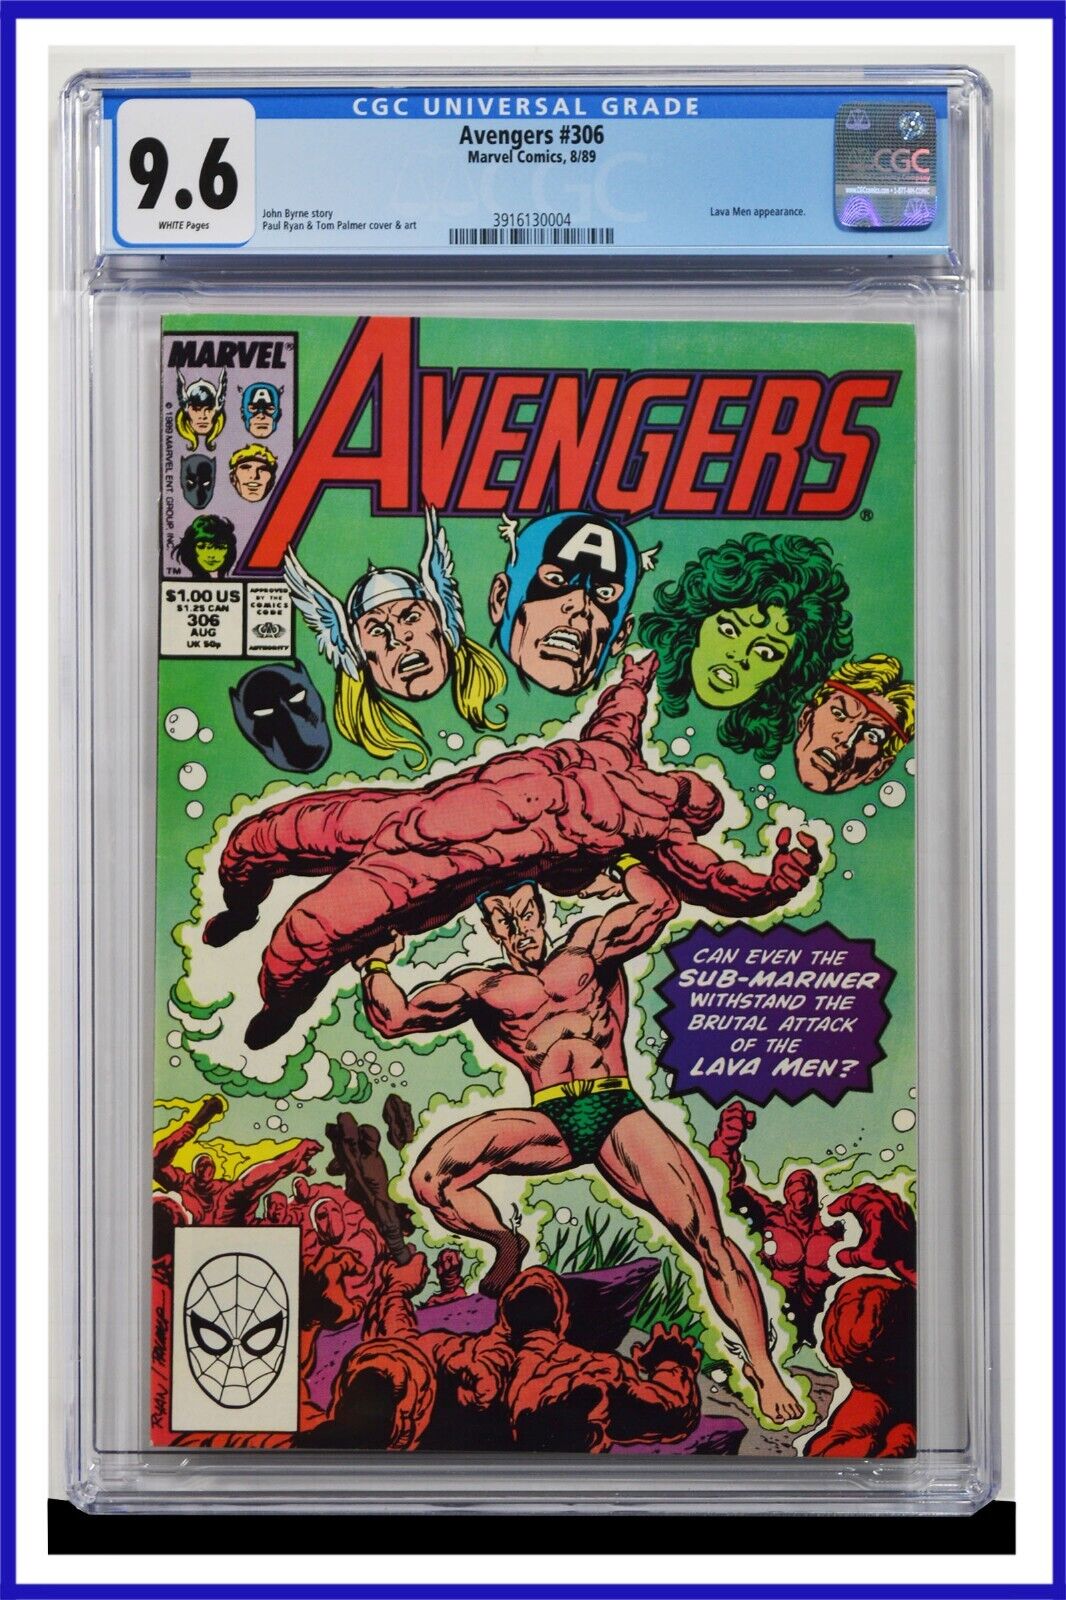 Avengers #306 CGC Graded 9.6 Marvel August 1989 White Pages Comic Book.